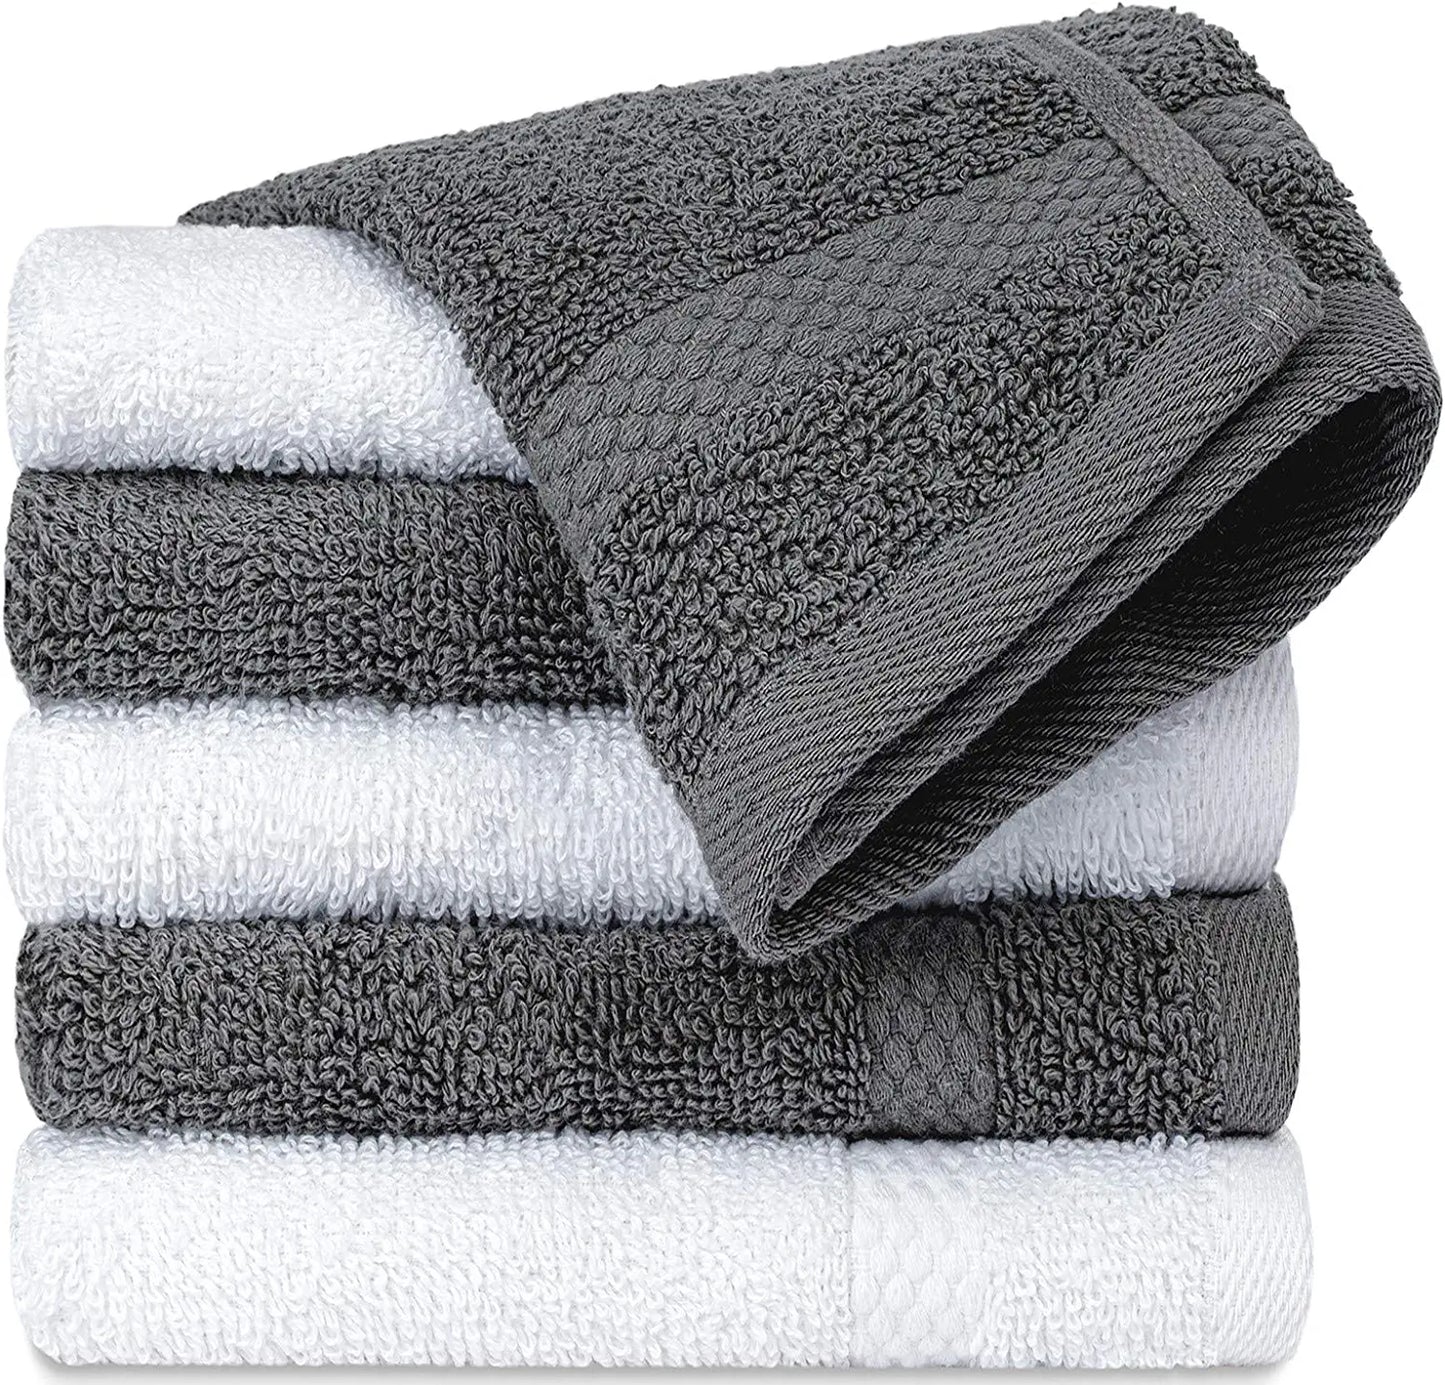 grey and white pack washcloths